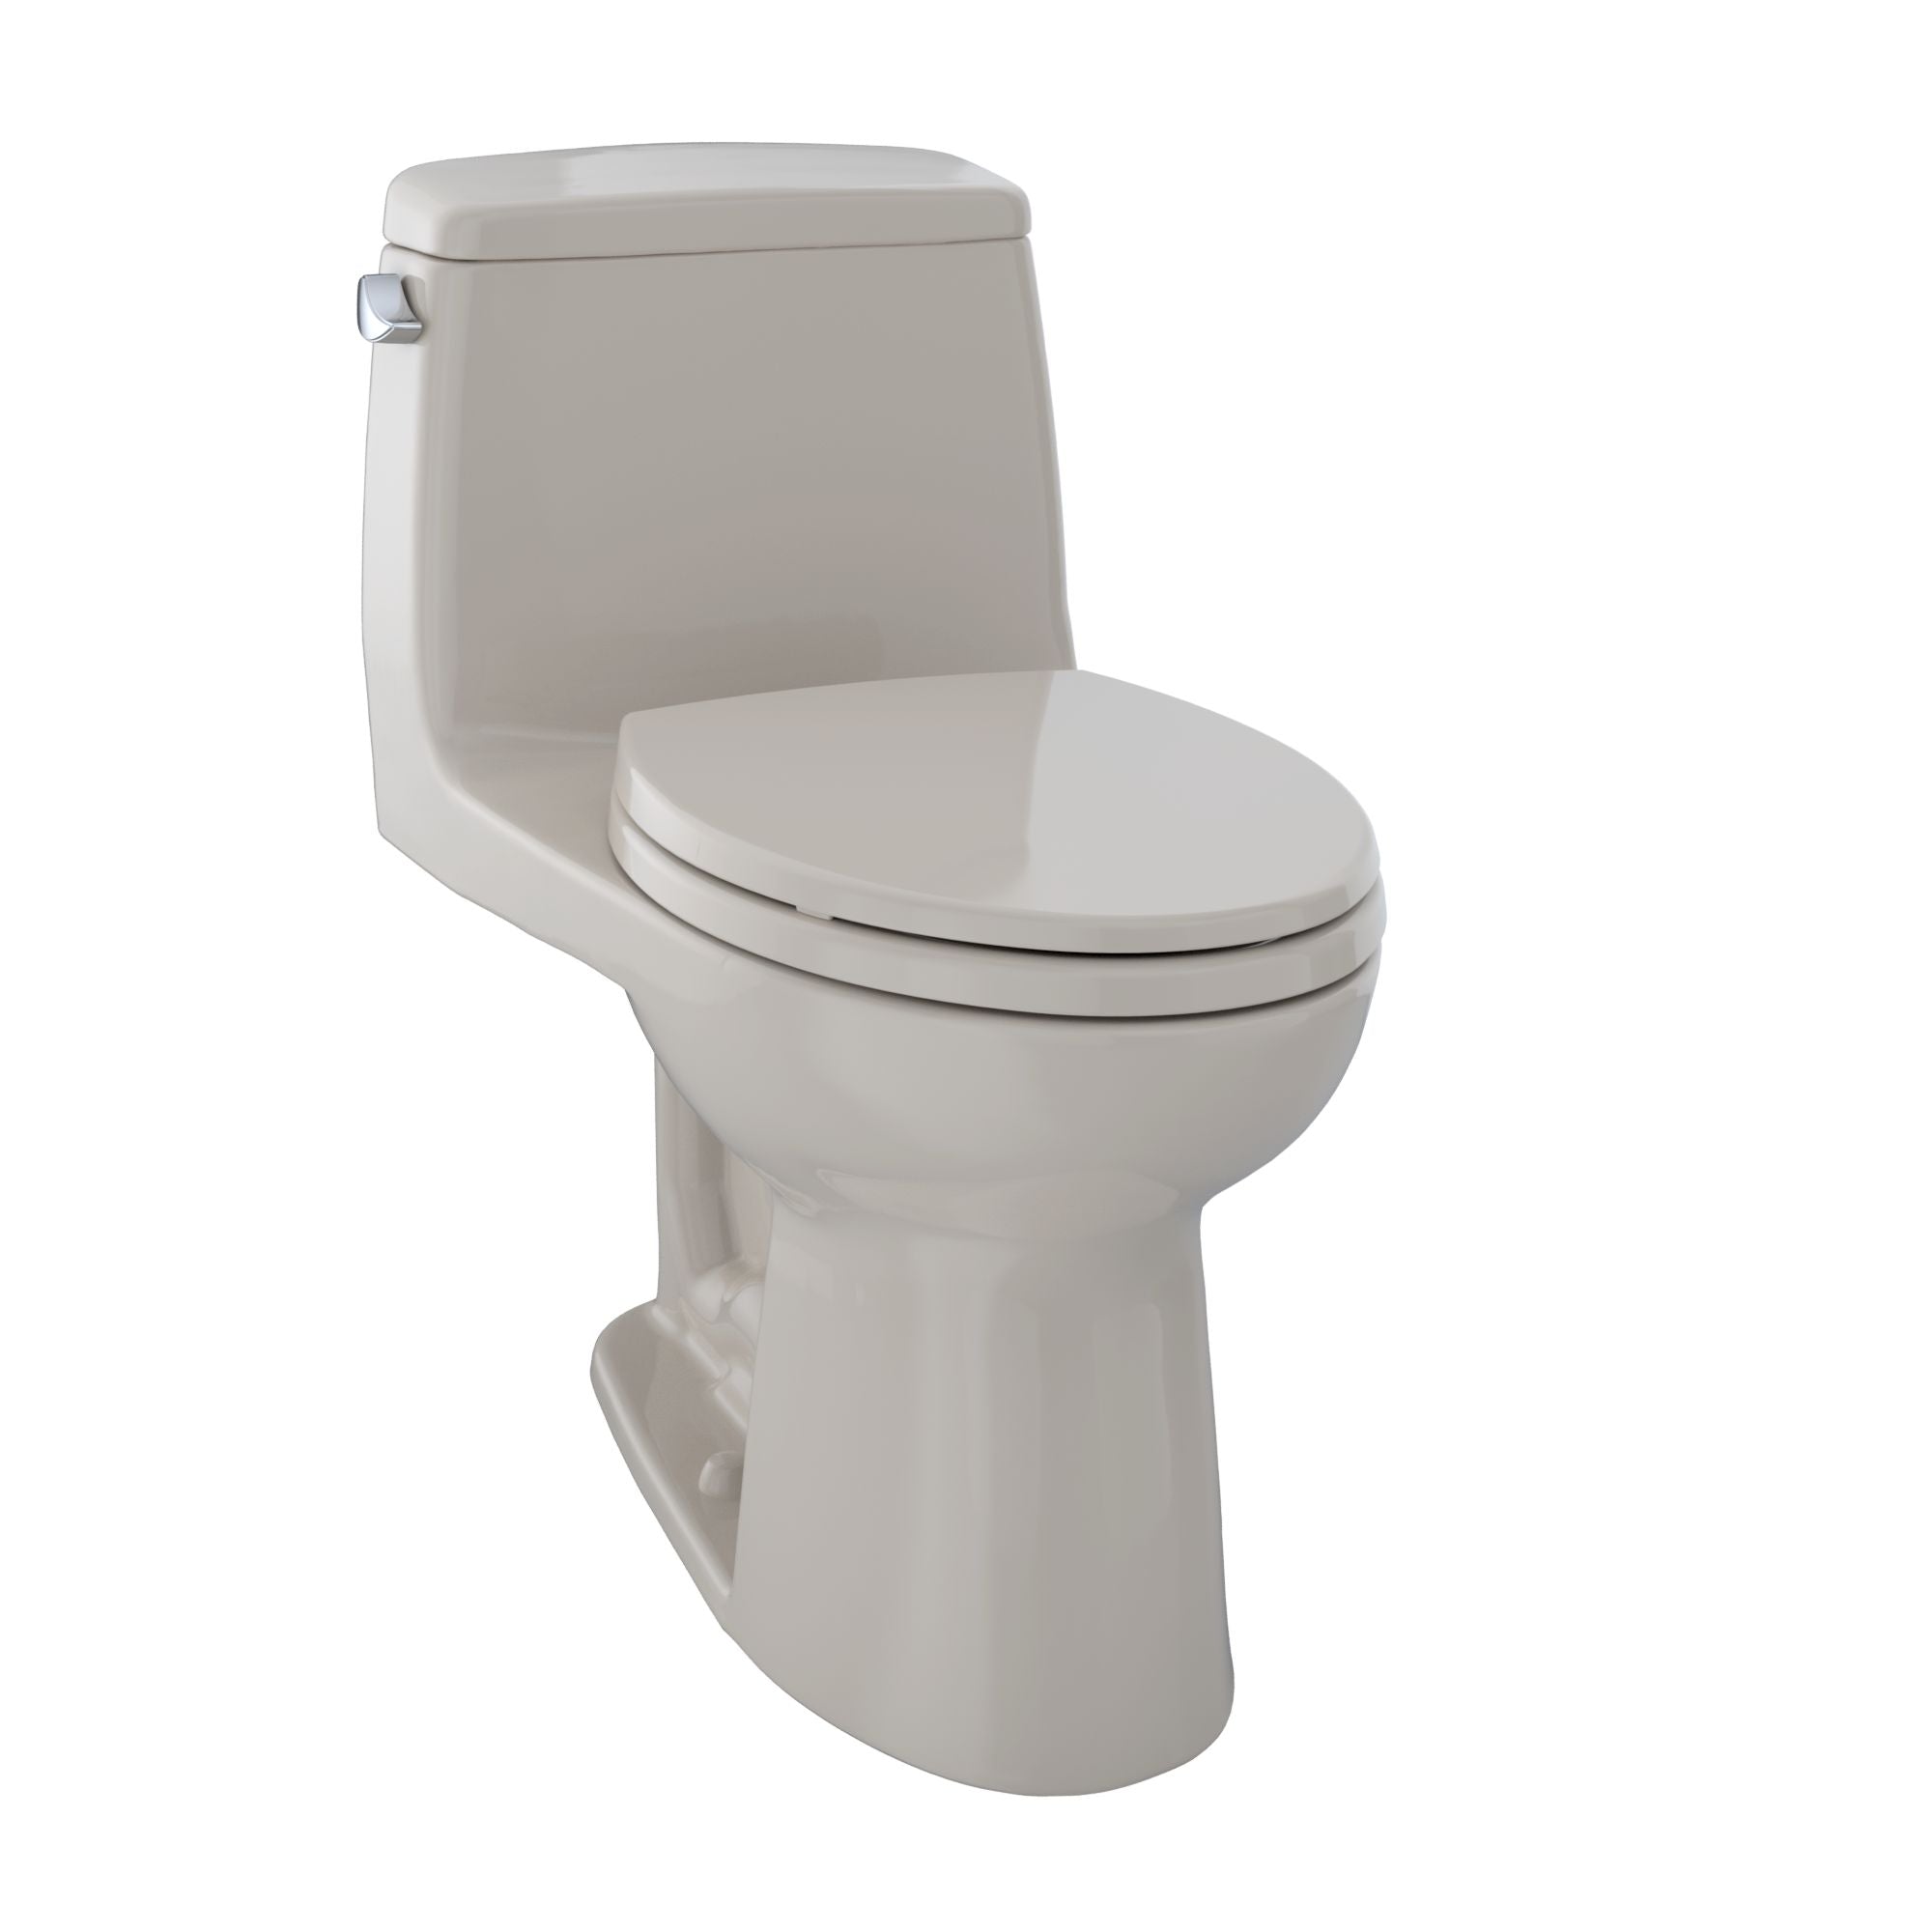 Toto Ultimate One-piece Toilet 1.6 GPF Elongated Bowl